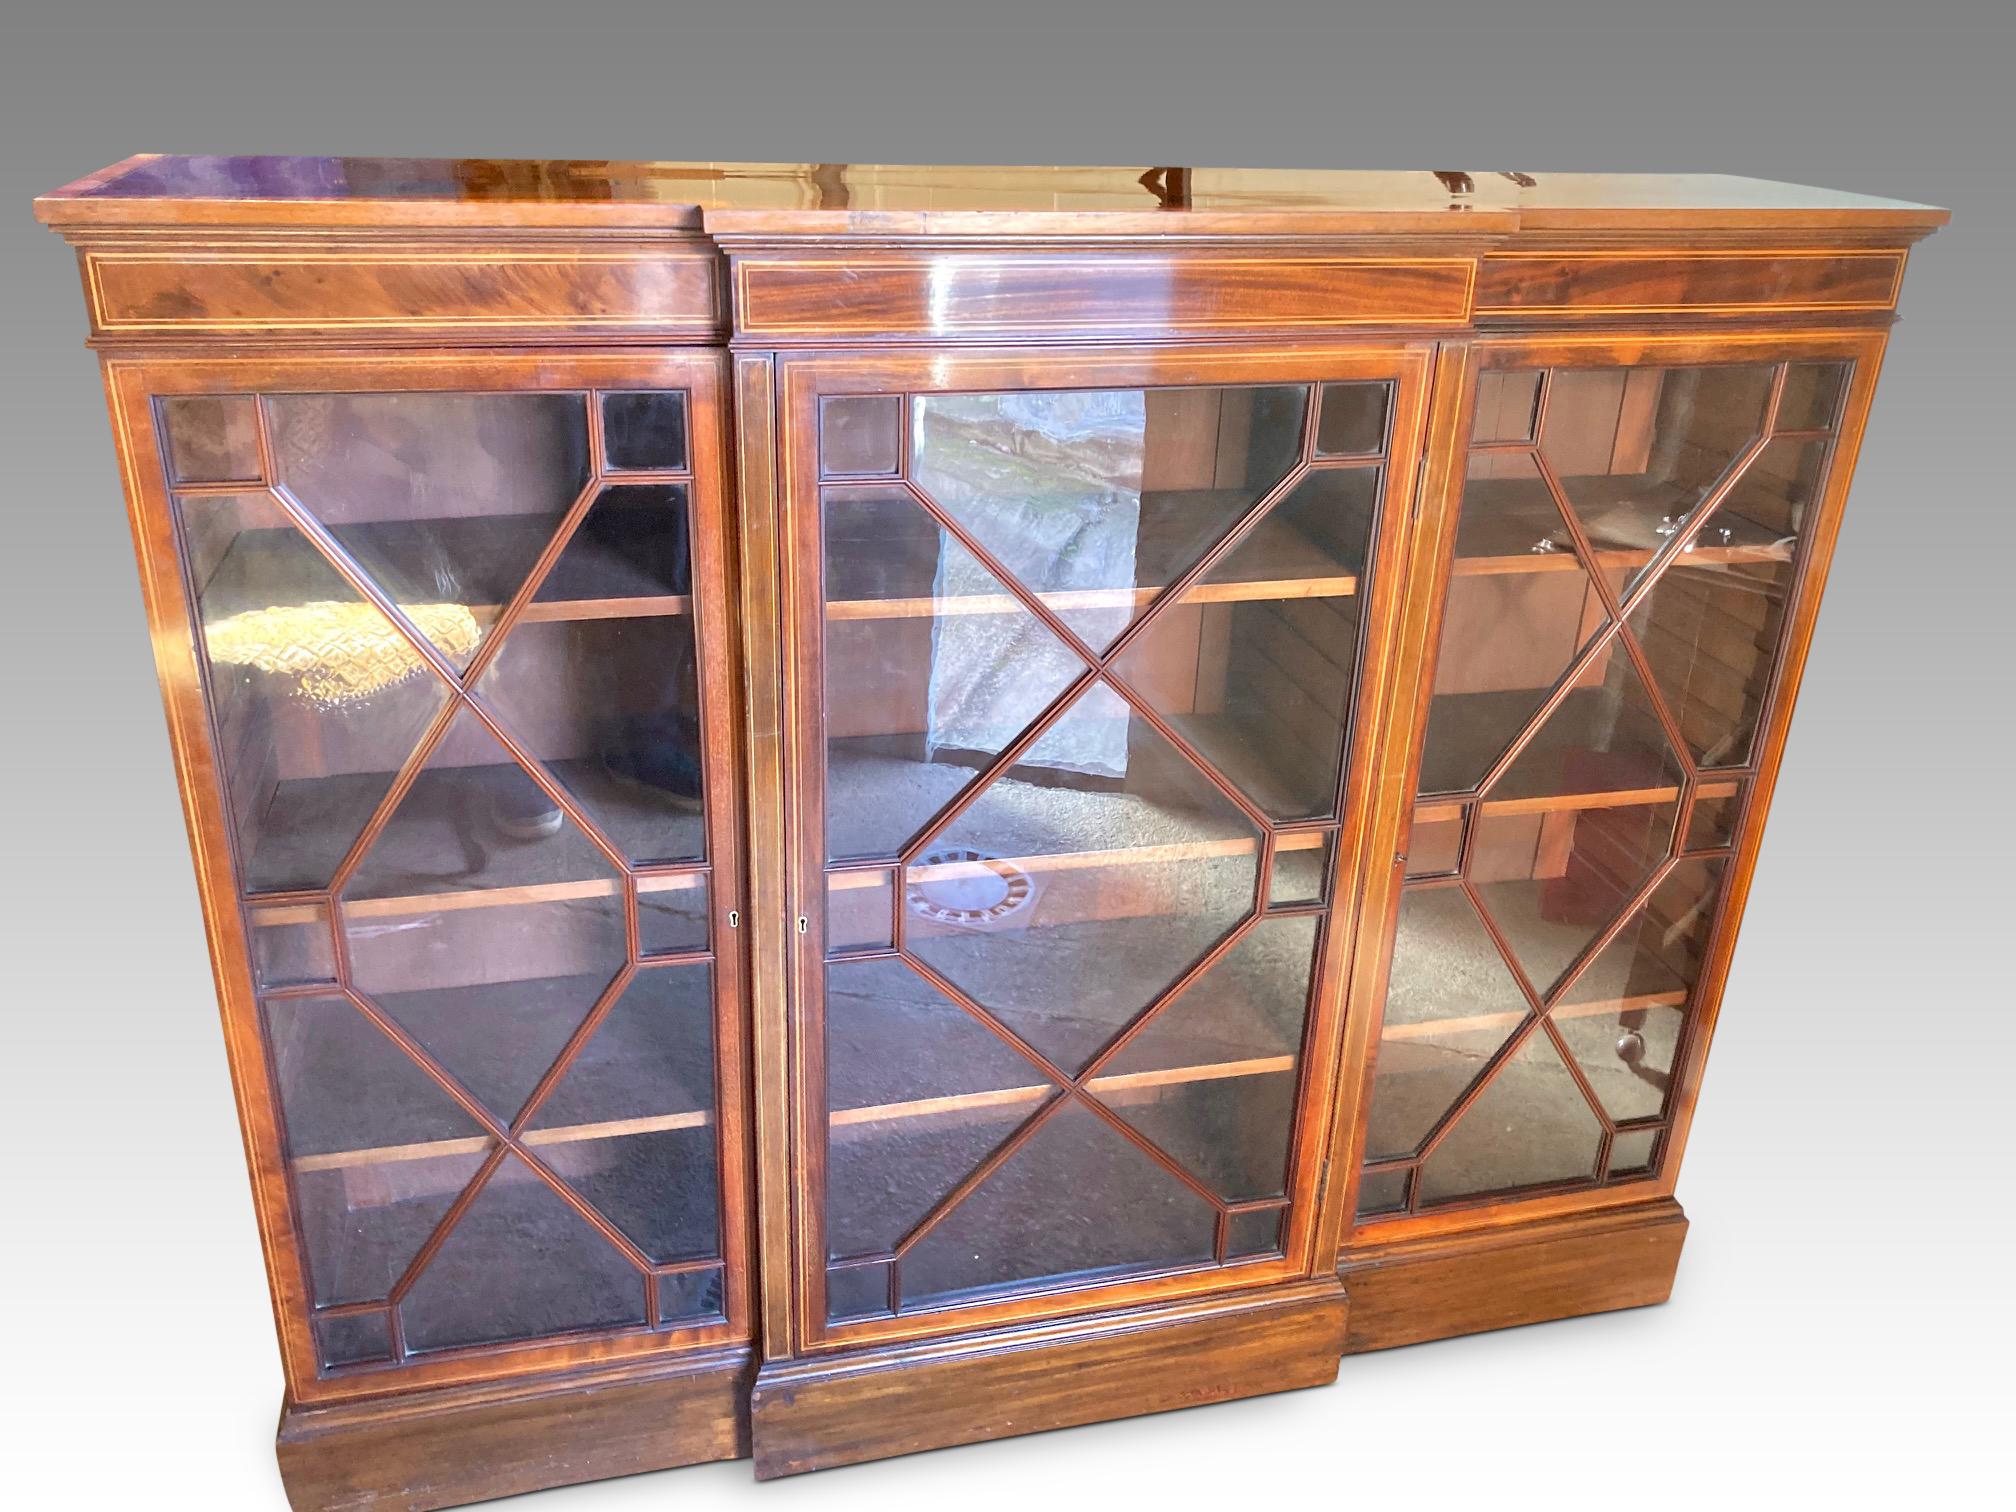 Fine quality English mahogany bookcase dating from the early 1900s. Edwardian period. This delightful bookcase has been well cared for by former owners. It is exceptionally attractive, clean, from a non smoking home and is in excellent condition.